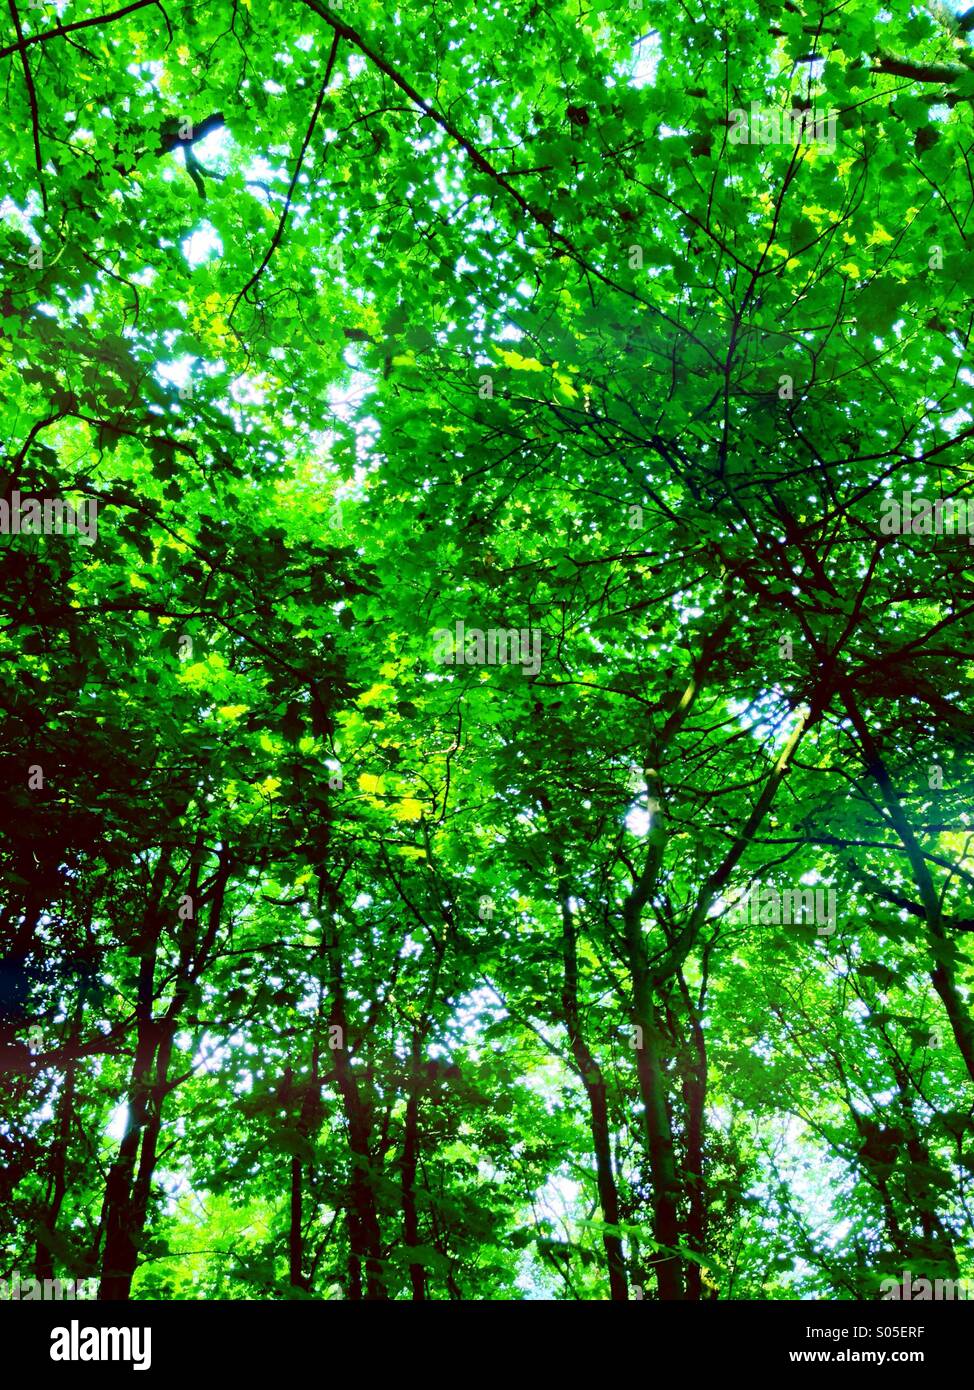 Under the summer tree canopy on a sunny day Stock Photo